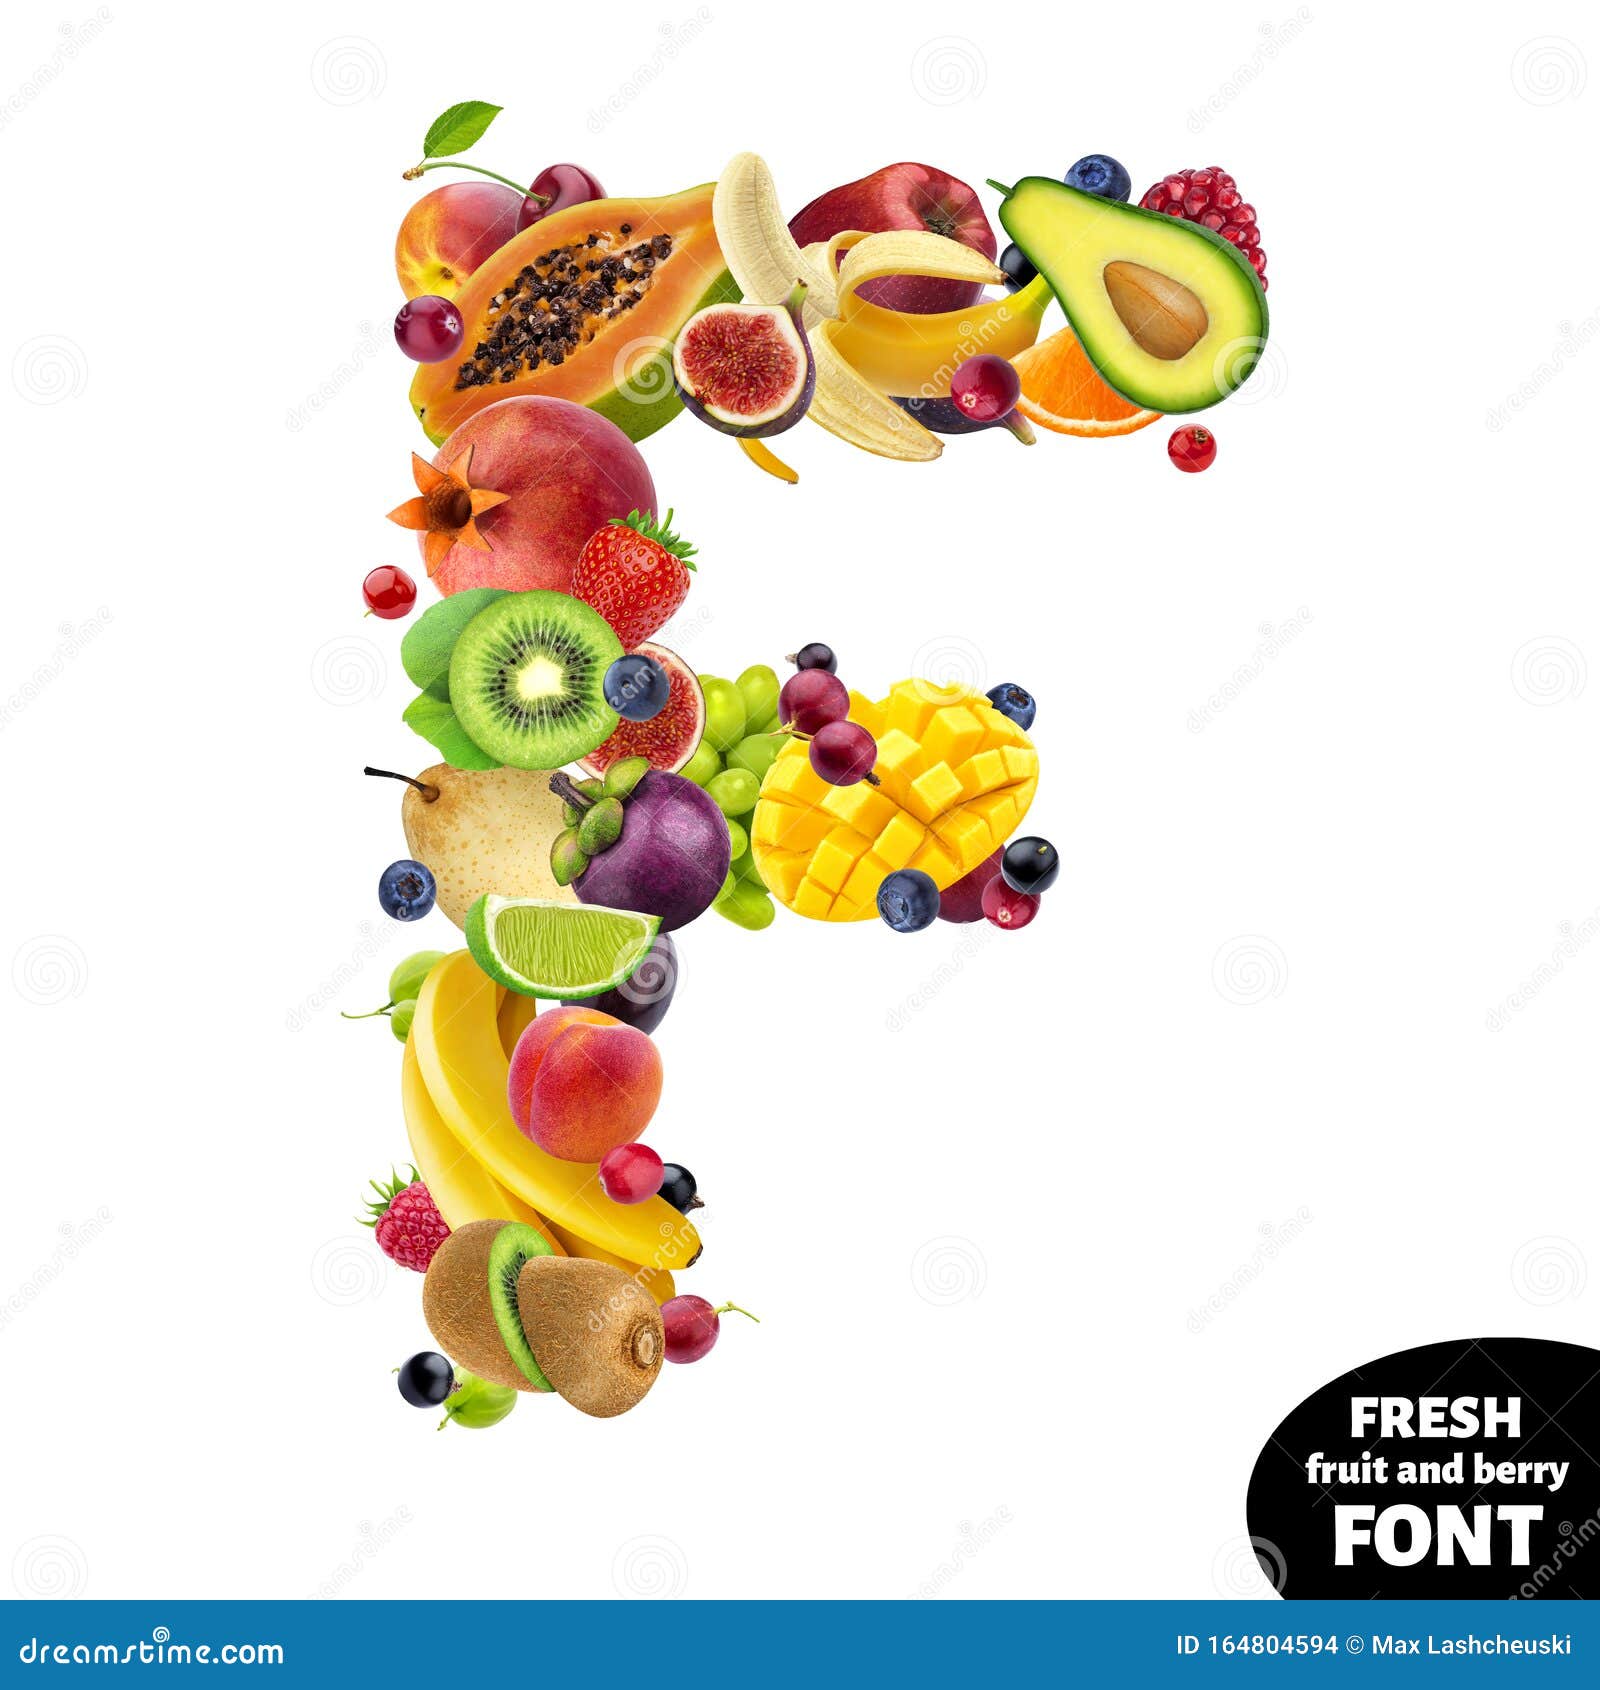 https://thumbs.dreamstime.com/z/letter-f-fruit-font-symbol-isolated-white-background-made-fresh-healthy-food-ingredients-clipping-path-164804594.jpg